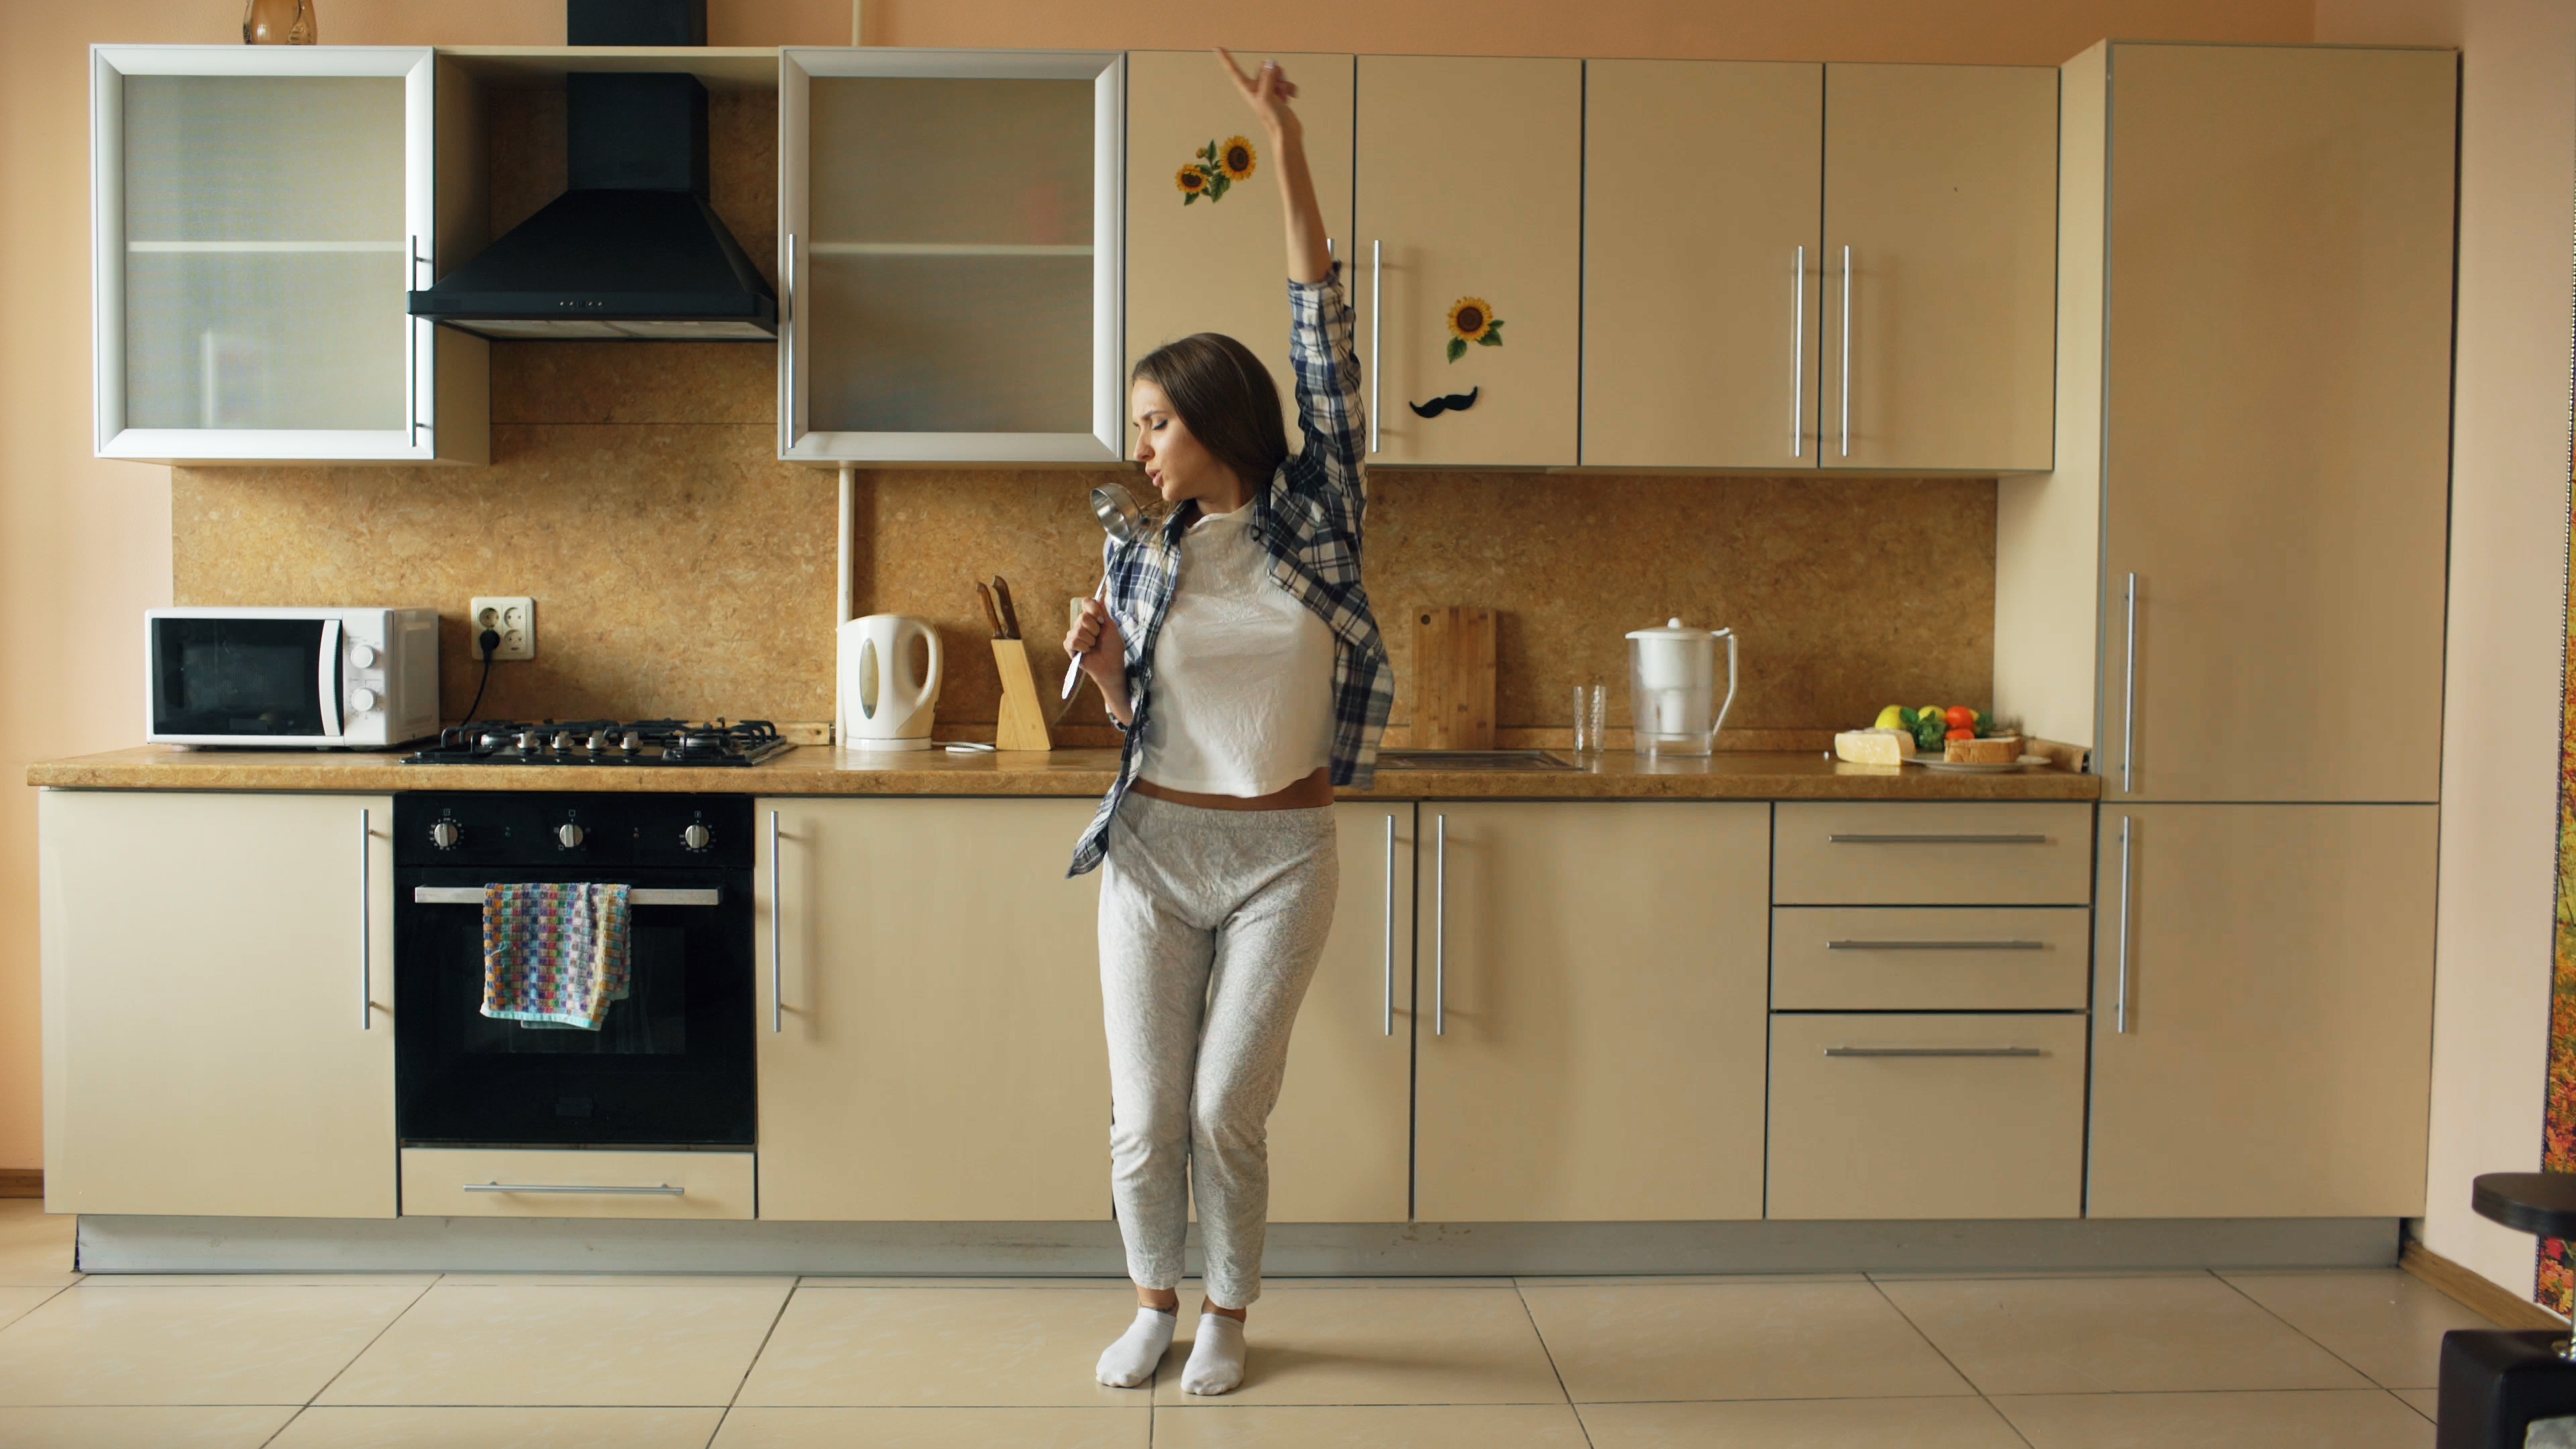 A person dancing in their kitchen, which is filled with natural light.